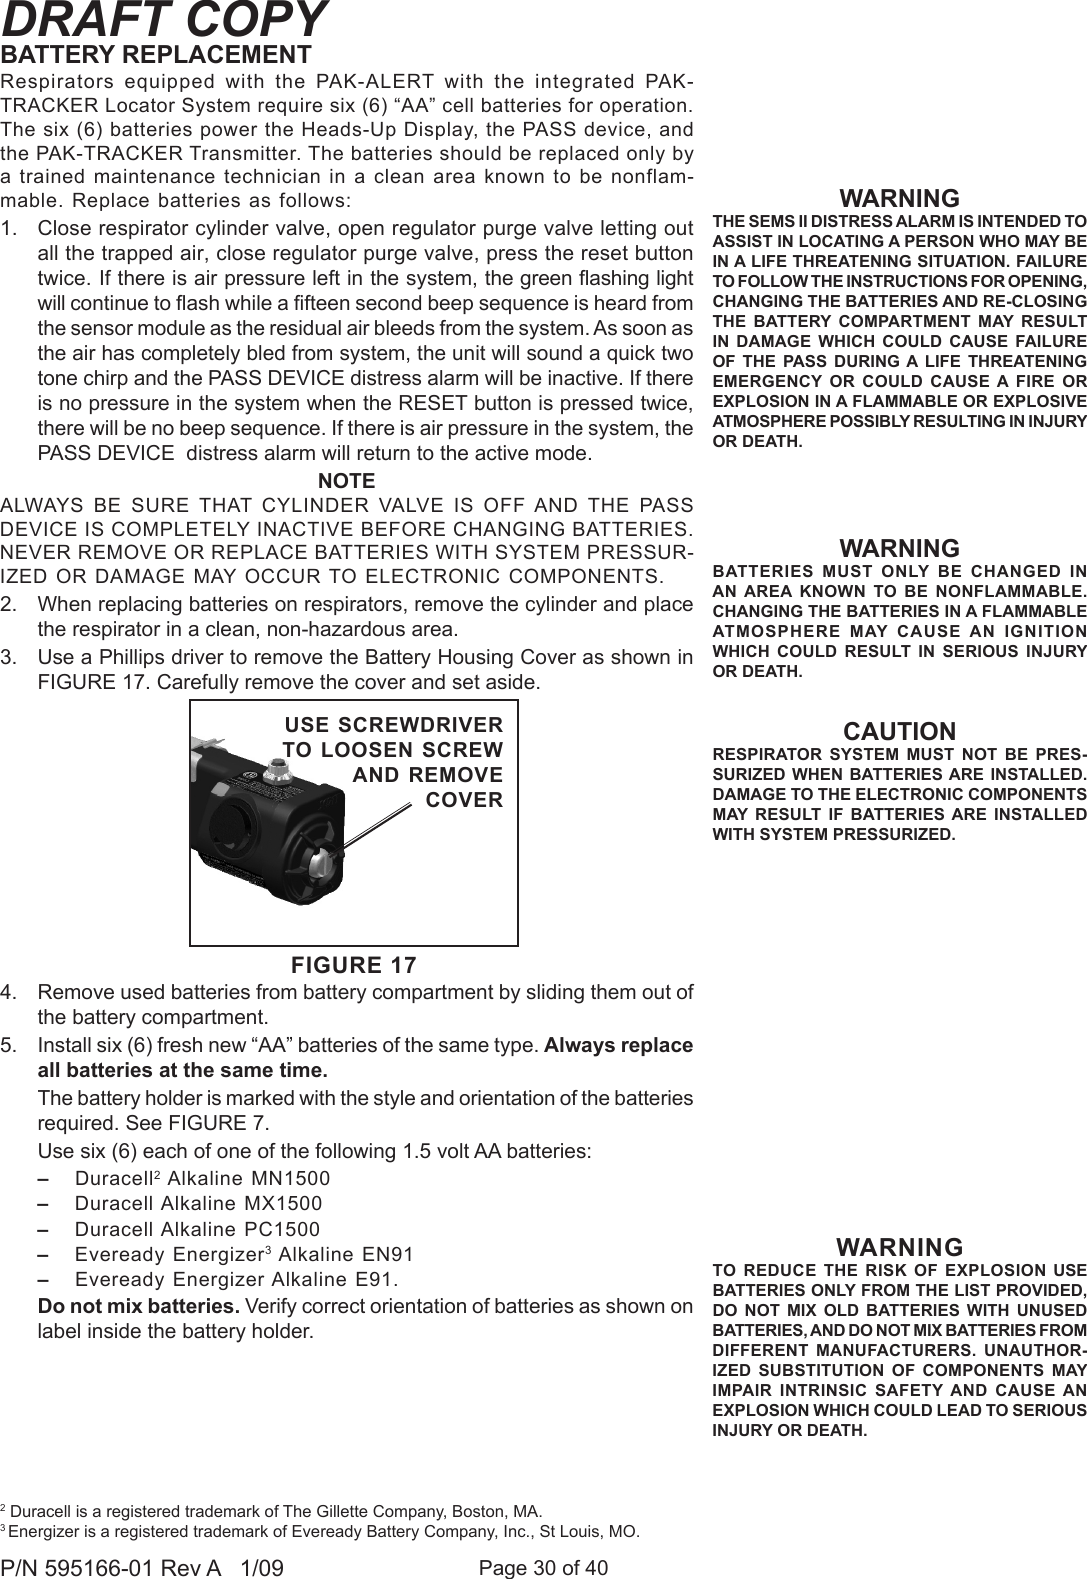 Page 30 of 40P/N 595166-01 Rev A   1/09DRAFT COPYCAUTIONRESPIRATOR  SYSTEM  MUST  NOT  BE  PRES-SURIZED WHEN  BATTERIES ARE  INSTALLED. DAMAGE TO THE ELECTRONIC COMPONENTS MAY  RESULT  IF  BATTERIES  ARE  INSTALLED WITH SYSTEM PRESSURIZED.Respirators  equipped  with  the  PAK-ALERT  with  the  integrated  PAK-TRACKER Locator System require six (6) “AA” cell batteries for operation. The six (6) batteries power the Heads-Up Display, the PASS device, and the PAK-TRACKER Transmitter. The batteries should be replaced only by a trained maintenance technician in a clean area known to be nonflam-mable. Replace batteries as follows:1.  Close respirator cylinder valve, open regulator purge valve letting out all the trapped air, close regulator purge valve, press the reset button twice. If there is air pressure left in the system, the green ashing light will continue to ash while a fteen second beep sequence is heard from the sensor module as the residual air bleeds from the system. As soon as the air has completely bled from system, the unit will sound a quick two tone chirp and the PASS DEVICE distress alarm will be inactive. If there is no pressure in the system when the RESET button is pressed twice, there will be no beep sequence. If there is air pressure in the system, the PASS DEVICE  distress alarm will return to the active mode.NOTEALWAYS  BE  SURE  THAT  CYLINDER  VALVE  IS  OFF AND THE  PASS DEVICE IS COMPLETELY INACTIVE BEFORE CHANGING BATTERIES. NEVER REMOVE OR REPLACE BATTERIES WITH SYSTEM PRESSUR-IZED OR DAMAGE MAY OCCUR TO ELECTRONIC COMPONENTS.2.  When replacing batteries on respirators, remove the cylinder and place the respirator in a clean, non-hazardous area.3.  Use a Phillips driver to remove the Battery Housing Cover as shown in FIGURE 17. Carefully remove the cover and set aside.4.  Remove used batteries from battery compartment by sliding them out of the battery compartment.5.  Install six (6) fresh new “AA” batteries of the same type. Always replace all batteries at the same time.   The battery holder is marked with the style and orientation of the batteries required. See FIGURE 7.  Use six (6) each of one of the following 1.5 volt AA batteries: –  Duracell2 Alkaline MN1500–  Duracell Alkaline MX1500 –  Duracell Alkaline PC1500 –  Eveready Energizer3 Alkaline EN91–  Eveready Energizer Alkaline E91.   Do not mix batteries. Verify correct orientation of batteries as shown on label inside the battery holder.WARNINGTHE SEMS II DISTRESS ALARM IS INTENDED TO ASSIST IN LOCATING A PERSON WHO MAY BE IN A LIFE THREATENING SITUATION. FAILURE TO FOLLOW THE INSTRUCTIONS FOR OPENING, CHANGING THE BATTERIES AND RE-CLOSING THE  BATTERY COMPARTMENT  MAY  RESULT IN  DAMAGE  WHICH  COULD  CAUSE  FAILURE OF  THE PASS  DURING A  LIFE THREATENING EMERGENCY  OR  COULD  CAUSE  A FIRE  OR EXPLOSION IN A FLAMMABLE OR EXPLOSIVE ATMOSPHERE POSSIBLY RESULTING IN INJURY OR DEATH. WARNINGBATTERIES  MUST  ONLY  BE  CHANGED  IN AN AREA  KNOWN  TO  BE  NONFLAMMABLE. CHANGING THE BATTERIES IN A FLAMMABLE ATMOSPHERE  MAY  CAUSE  AN  IGNITION WHICH  COULD RESULT  IN  SERIOUS  INJURY OR DEATH.BATTERY REPLACEMENT2 Duracell is a registered trademark of The Gillette Company, Boston, MA.3 Energizer is a registered trademark of Eveready Battery Company, Inc., St Louis, MO.WARNINGTO REDUCE THE RISK  OF  EXPLOSION USE BATTERIES ONLY FROM THE LIST PROVIDED, DO  NOT  MIX  OLD  BATTERIES  WITH  UNUSED BATTERIES, AND DO NOT MIX BATTERIES FROM DIFFERENT  MANUFACTURERS.  UNAUTHOR-IZED  SUBSTITUTION  OF  COMPONENTS  MAY IMPAIR  INTRINSIC SAFETY AND  CAUSE AN EXPLOSION WHICH COULD LEAD TO SERIOUS INJURY OR DEATH. FIGURE 17USE SCREWDRIVER TO LOOSEN SCREW AND REMOVE COVER